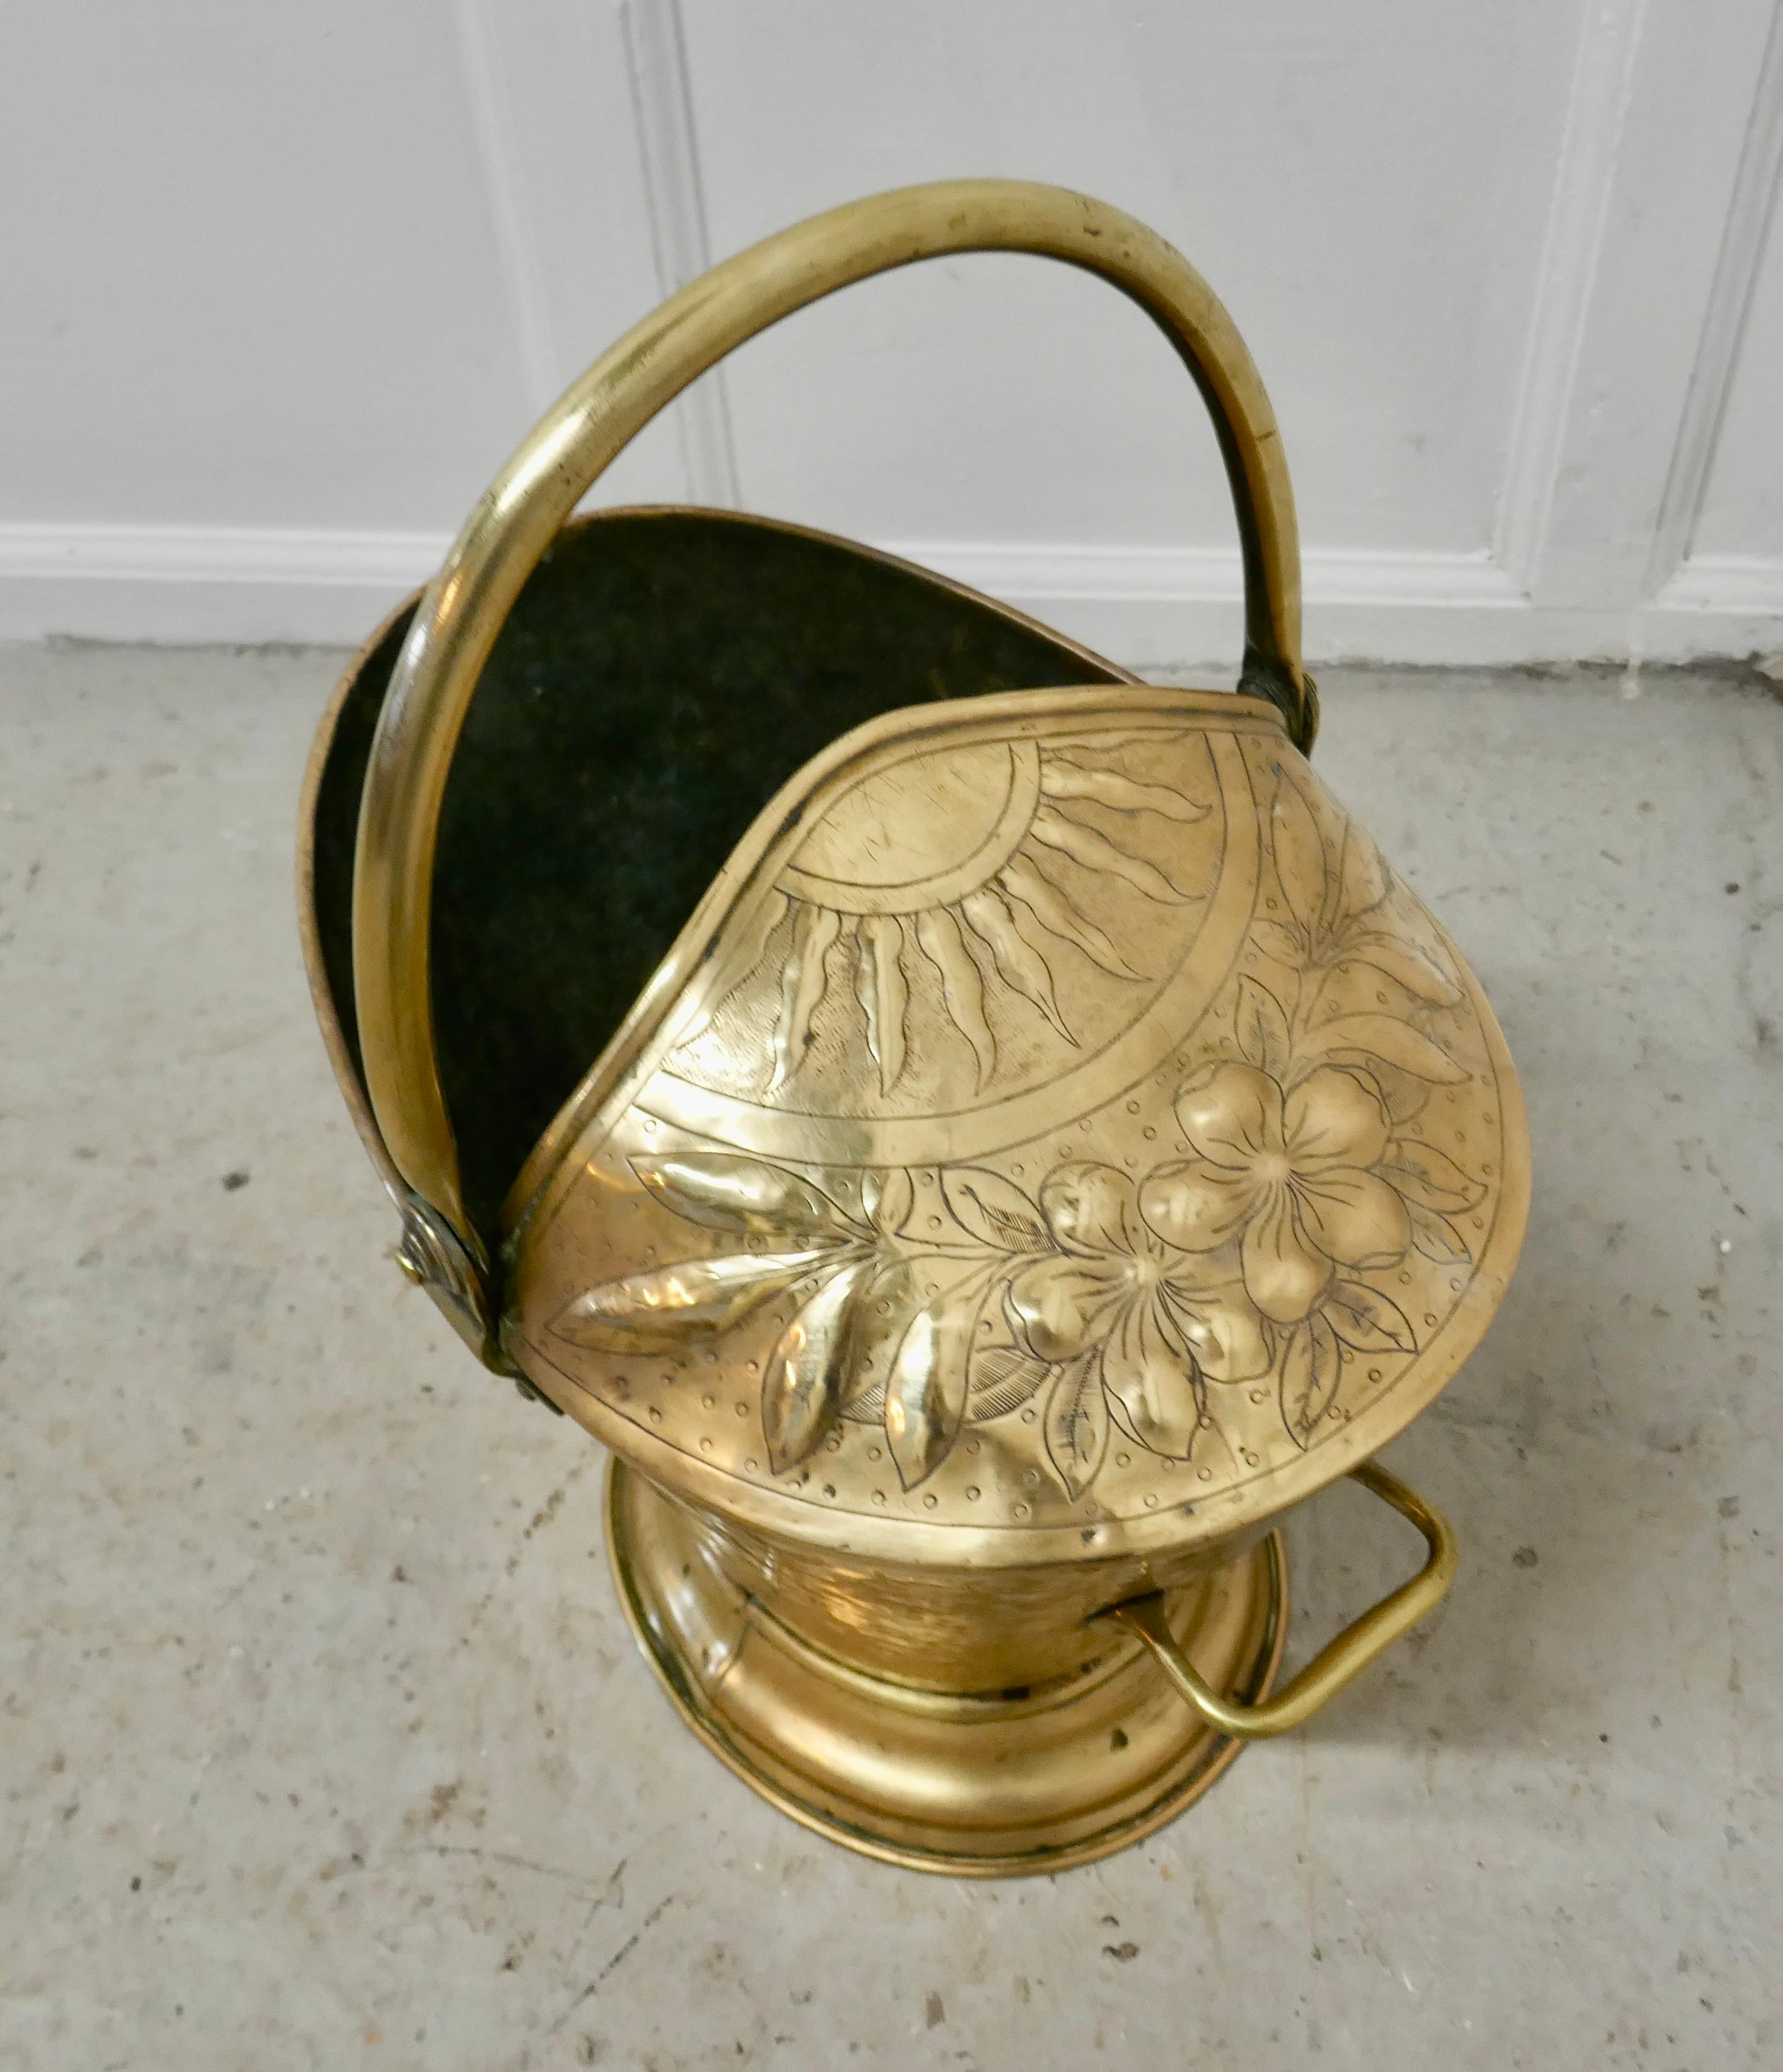 Victorian brass helmet coal scuttle 

This bucket is a very attractive partly enclosed oval shape, it is made in Brass with a hooped handle, it is decorated with a flaming sun and flowers
The scuttle is in good used condition, it has no faults just